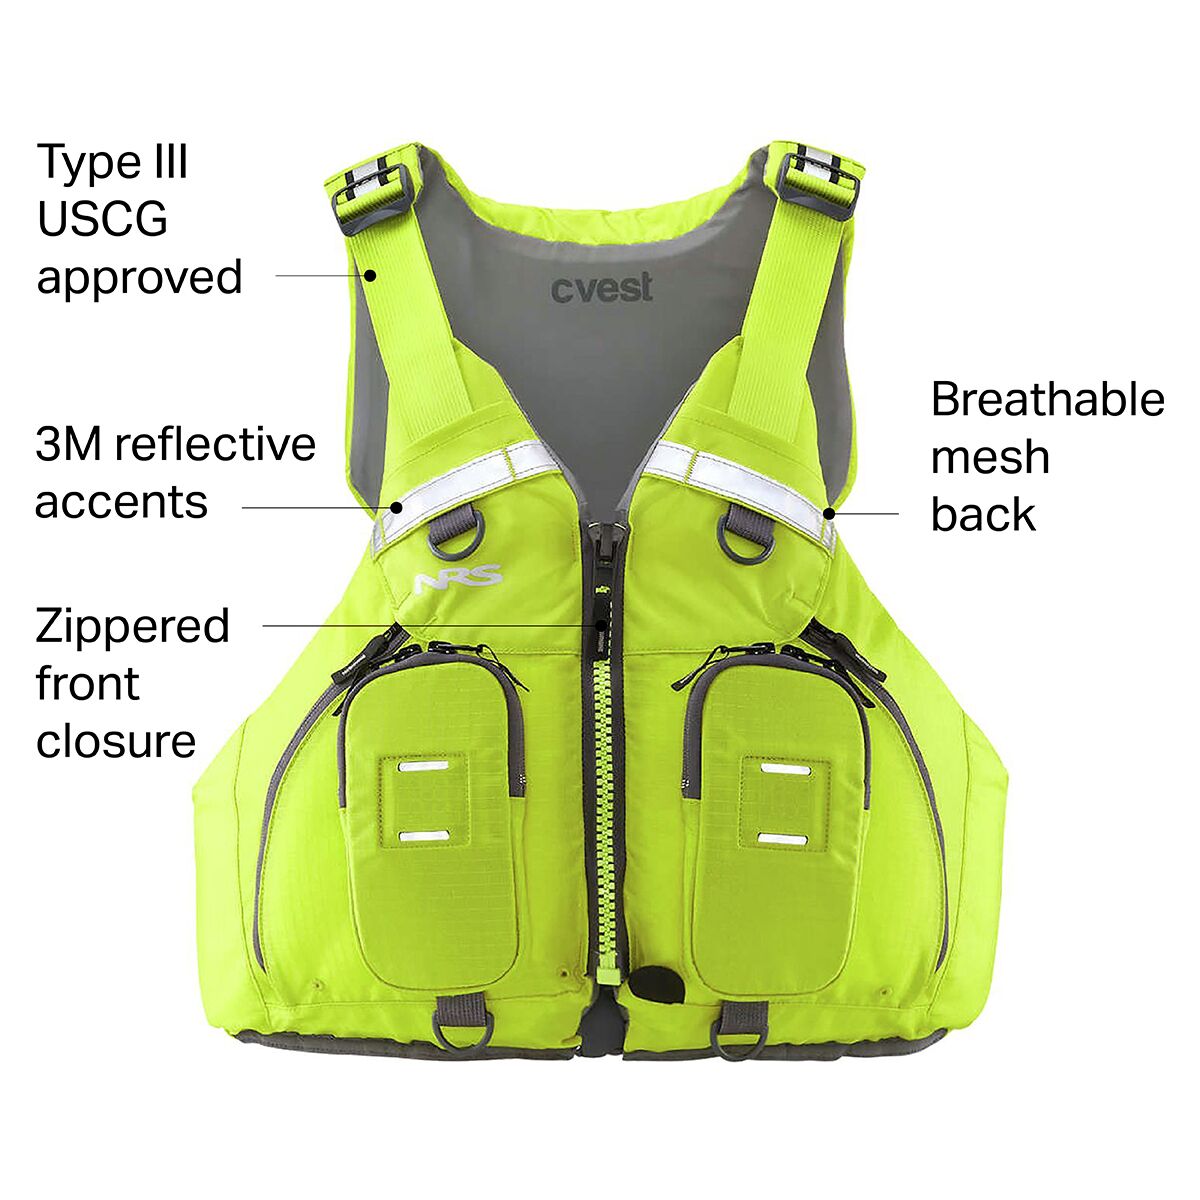 https://www.backcountry.com/images/items/1200/NRS/NRS0141/LM_D6.jpg